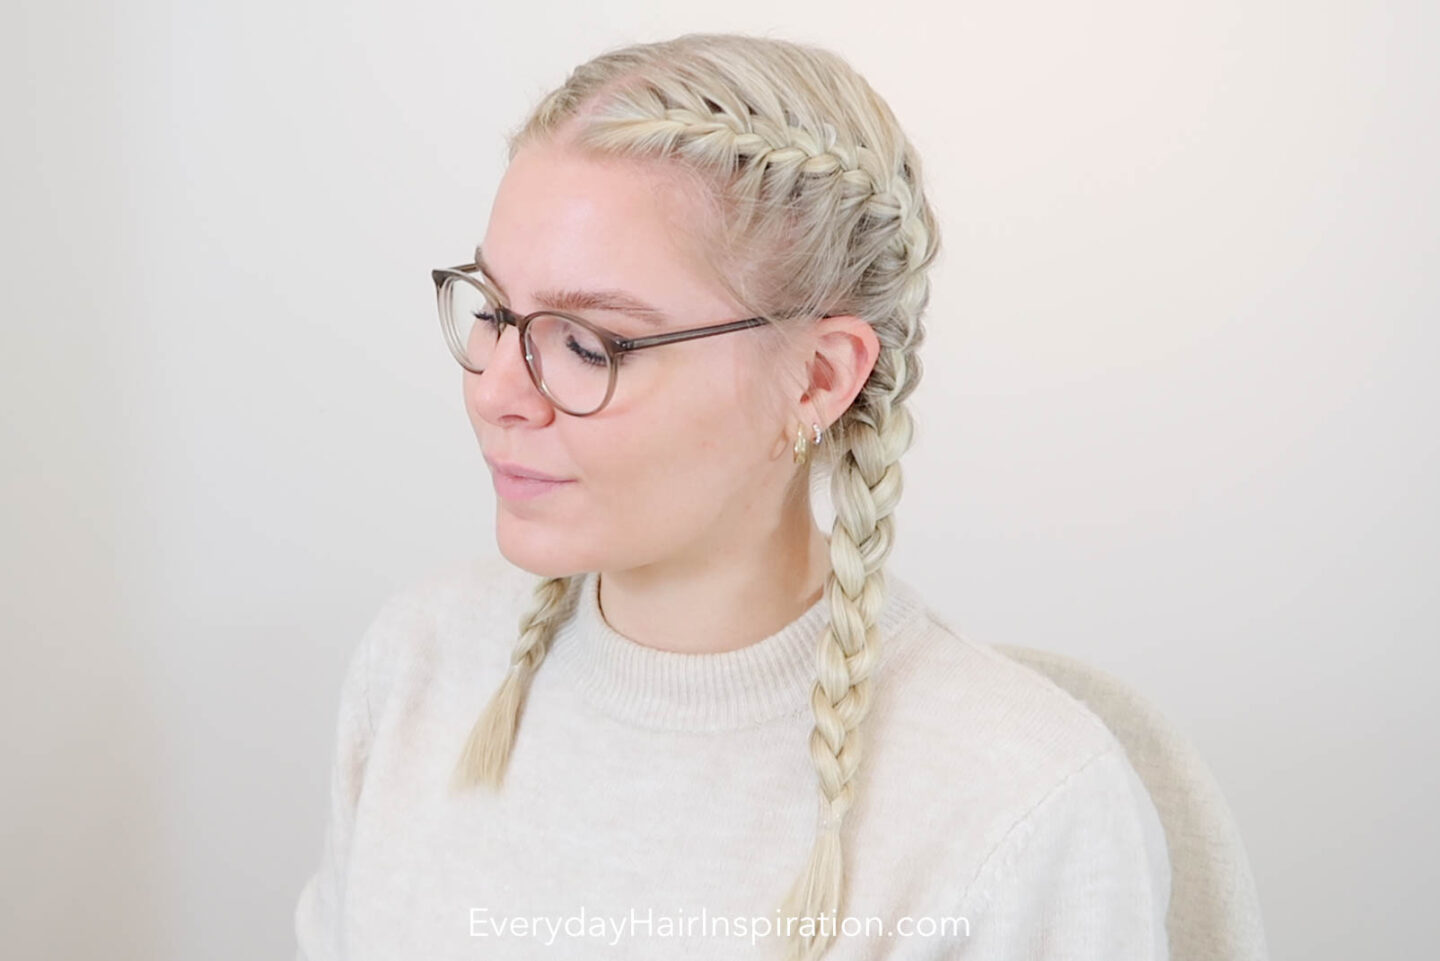 How to dutch braid for beginners! - Complete step by step follow